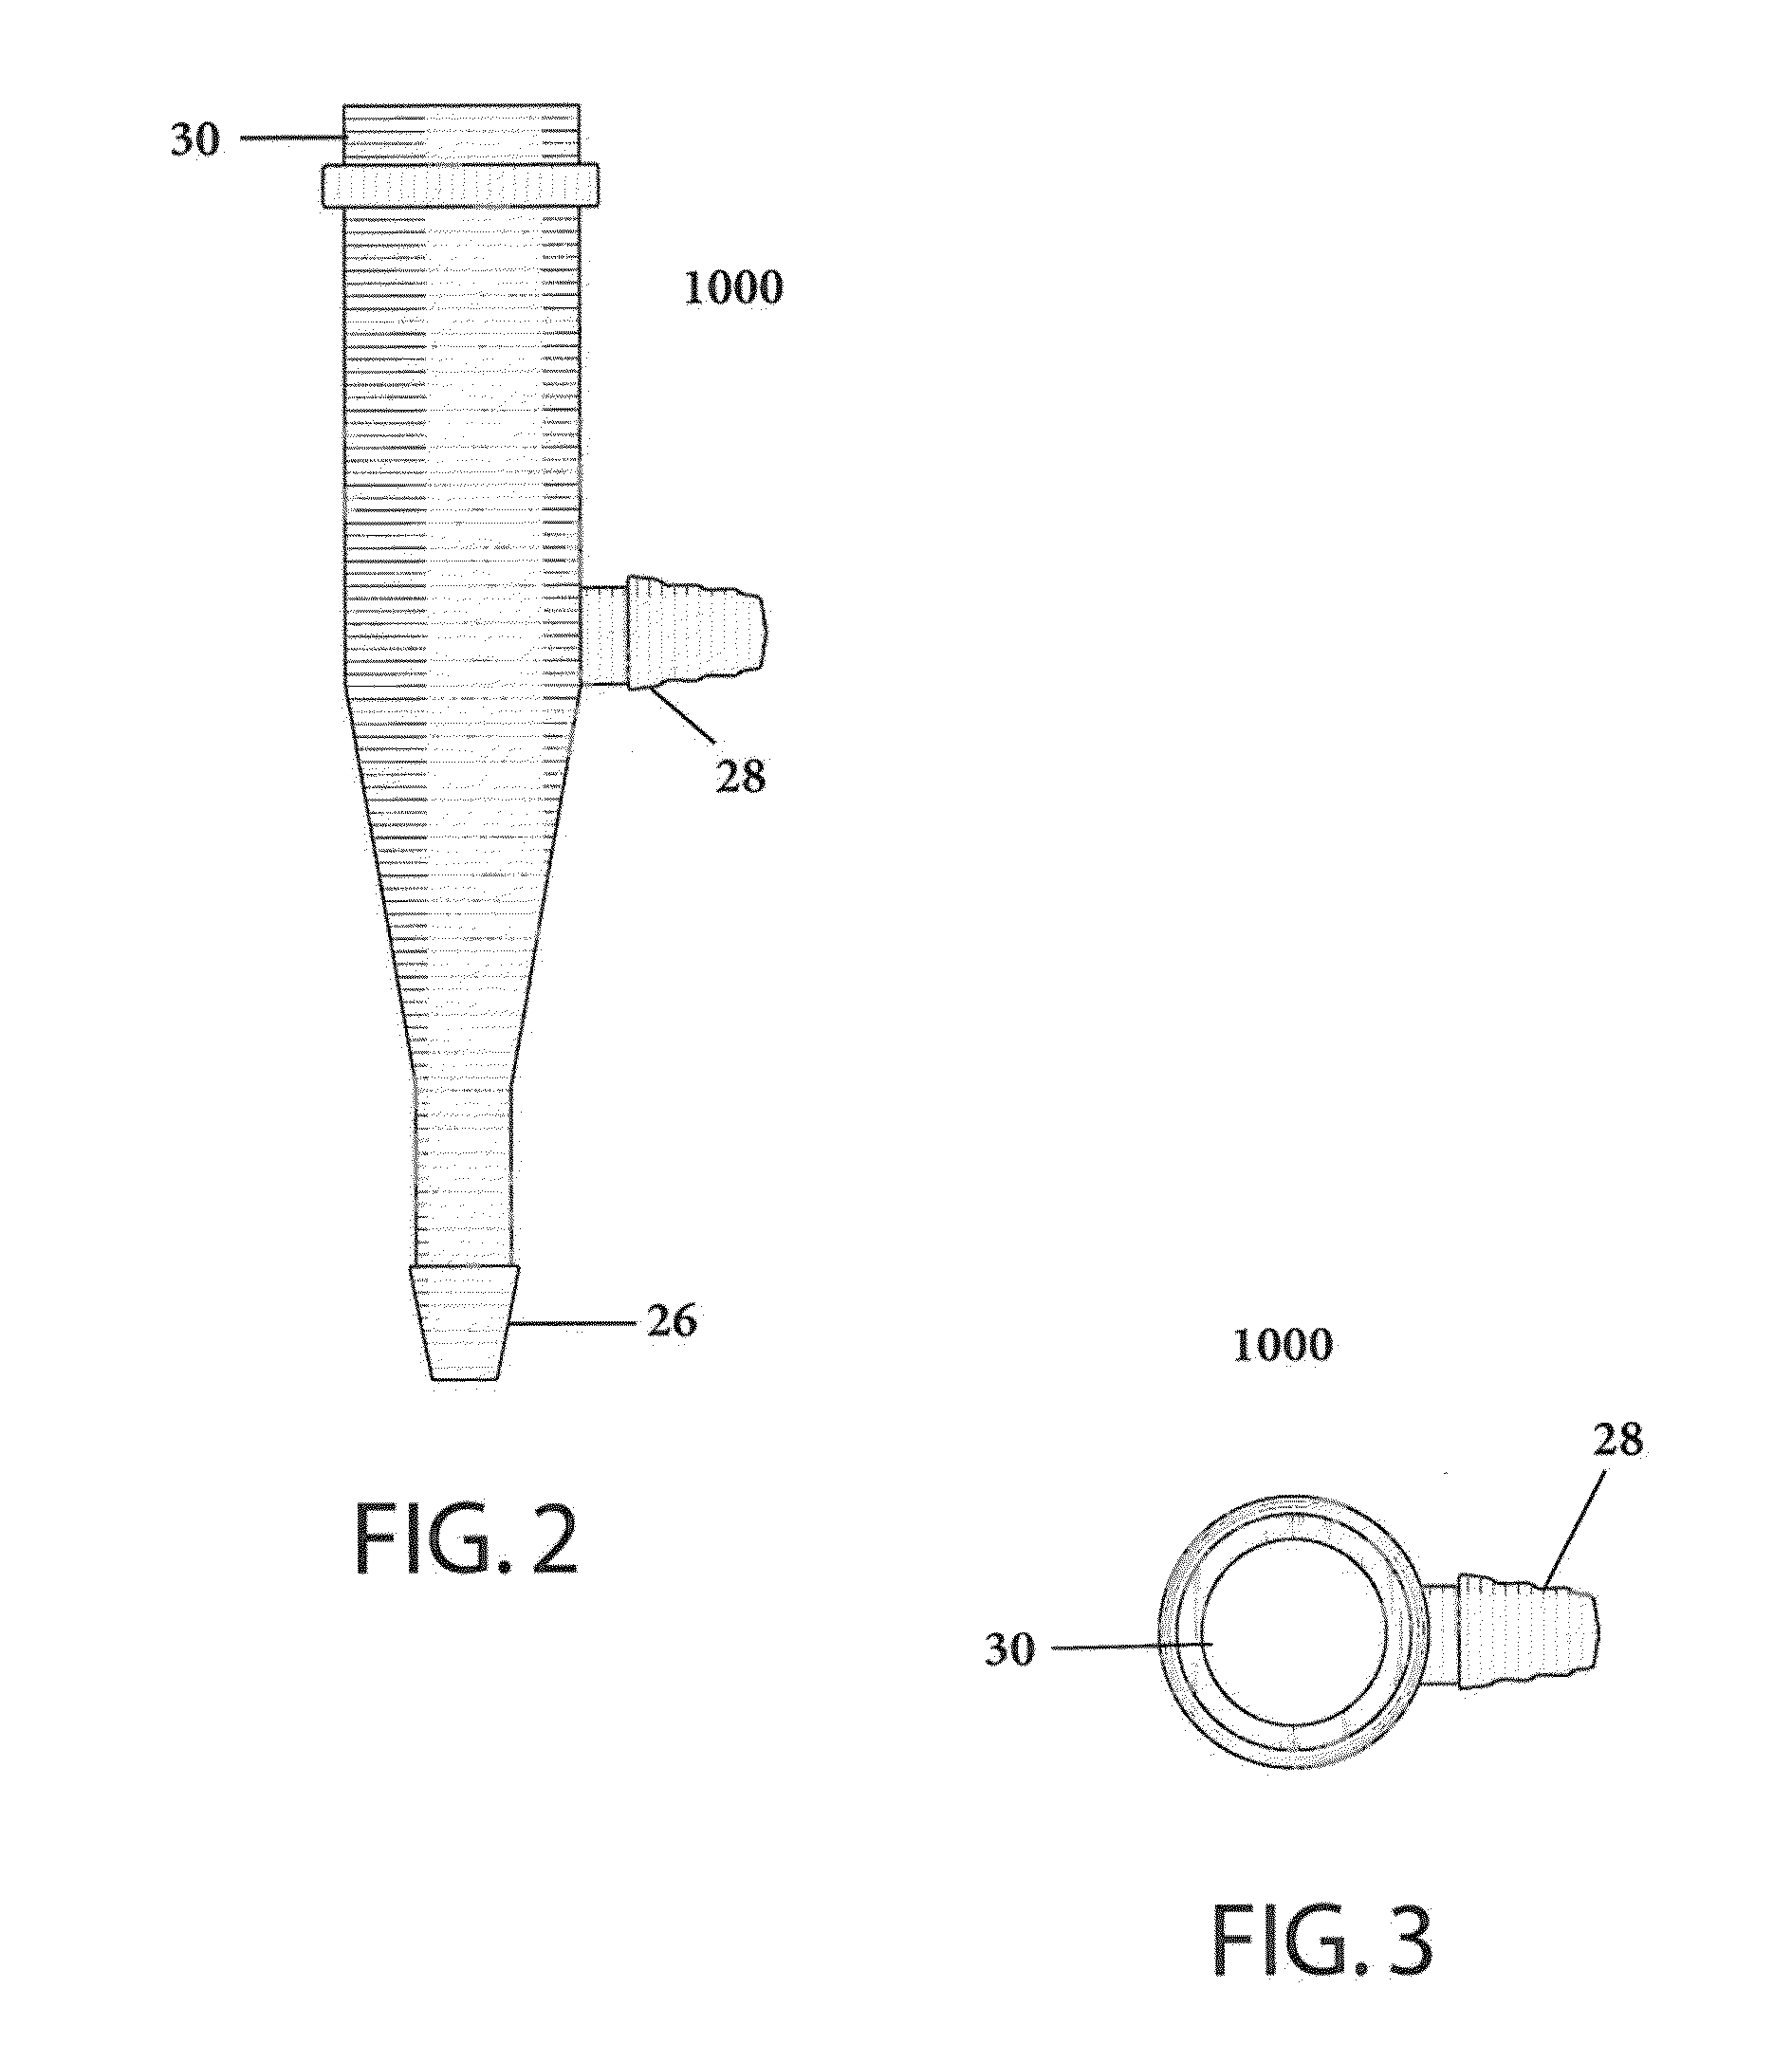 Beverage dispenser and related methods